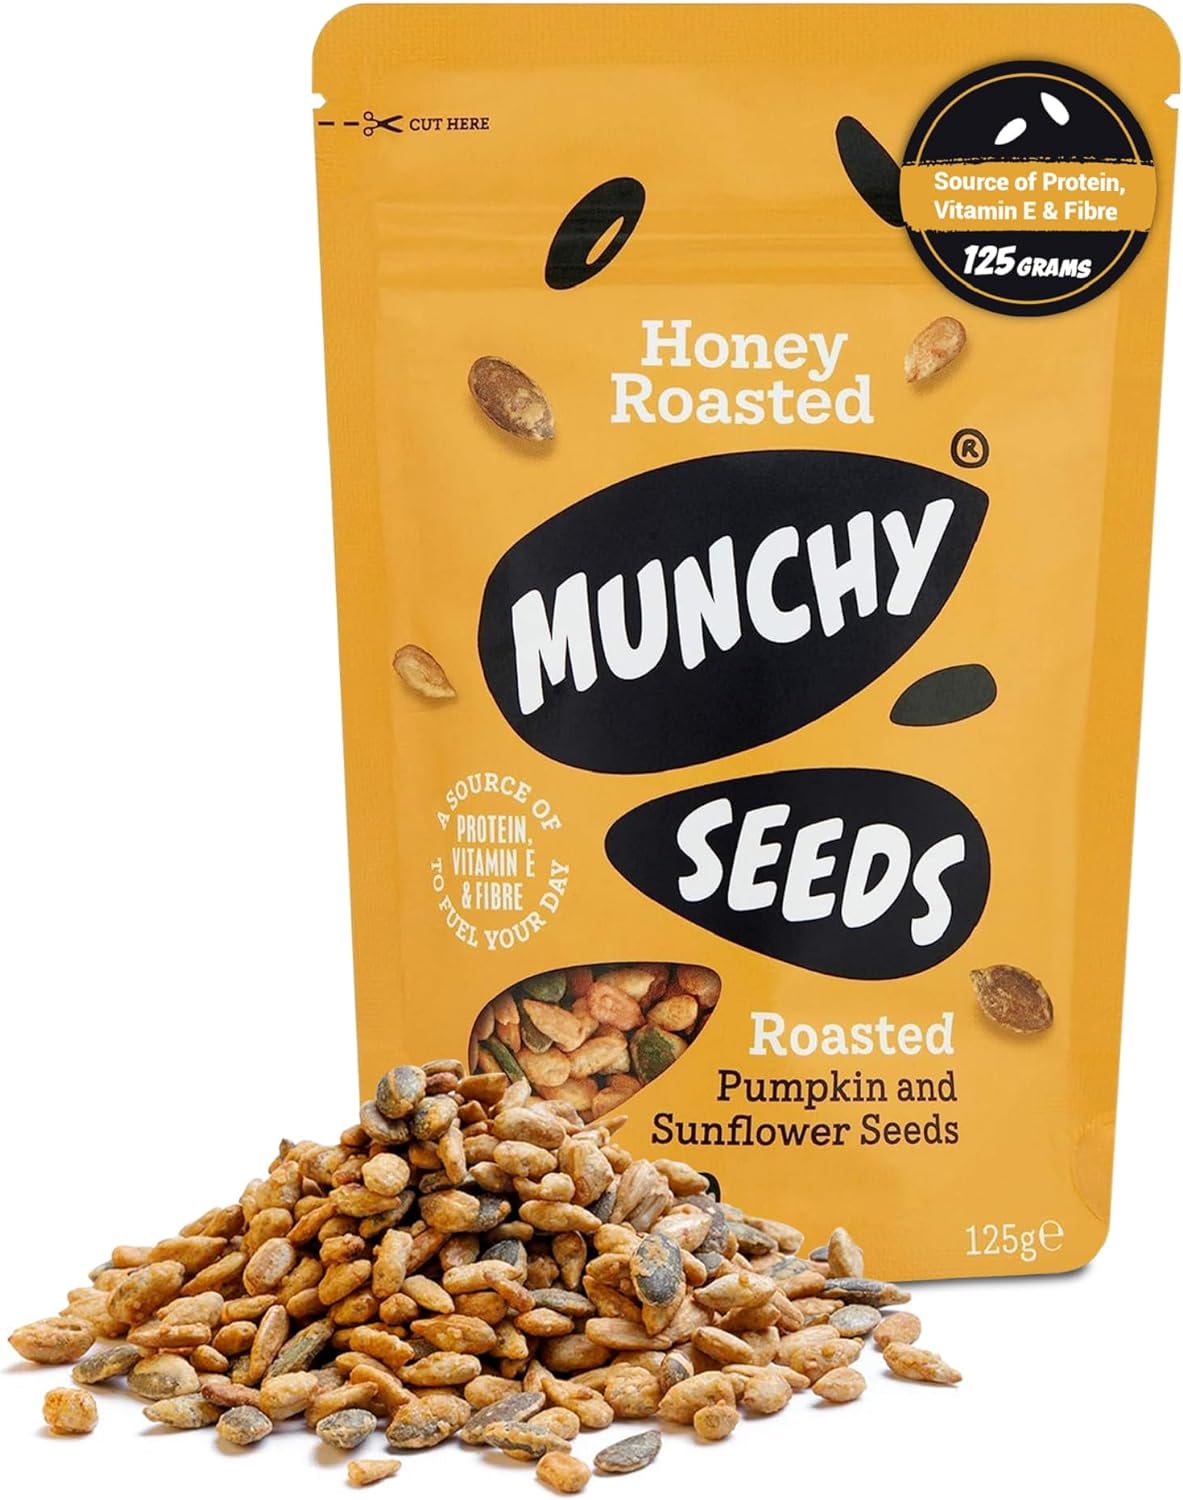 MUNCHY SEEDS Honey Roasted Review